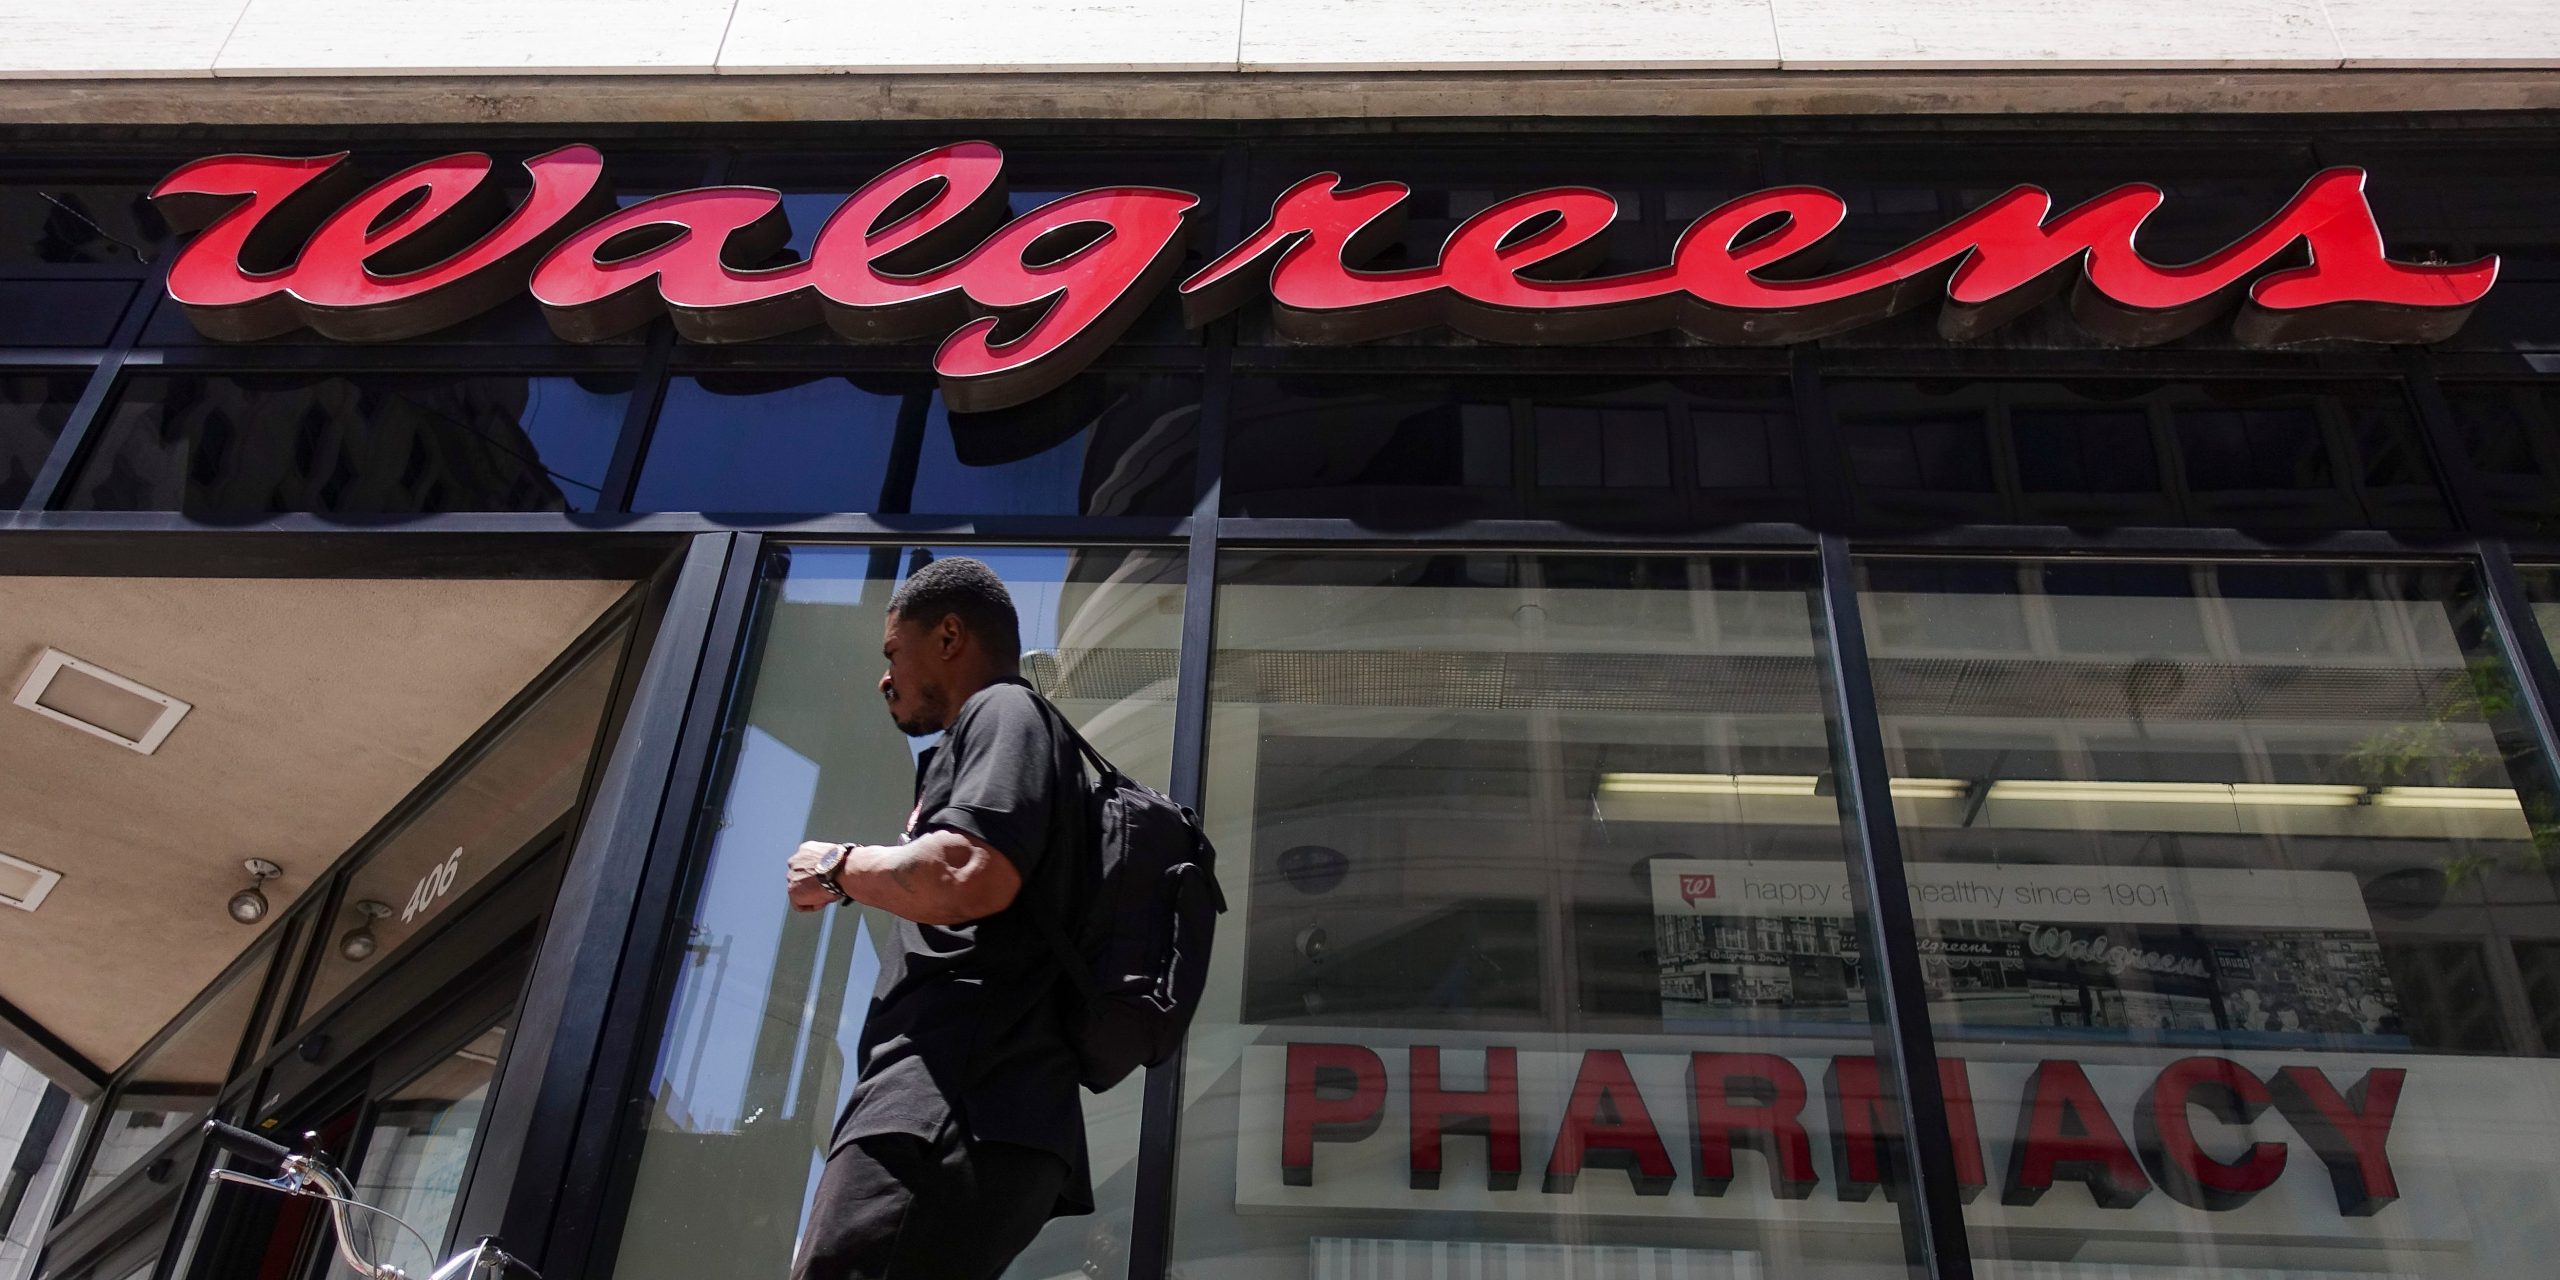 FILE - In this June 25, 2019, file photo signage hangs outside a Walgreens pharmacy in downtown Cincinnati. Walgreens reports financial results on Wednesday, Jan. 8, 2020. (AP Photo/John Minchillo, File)